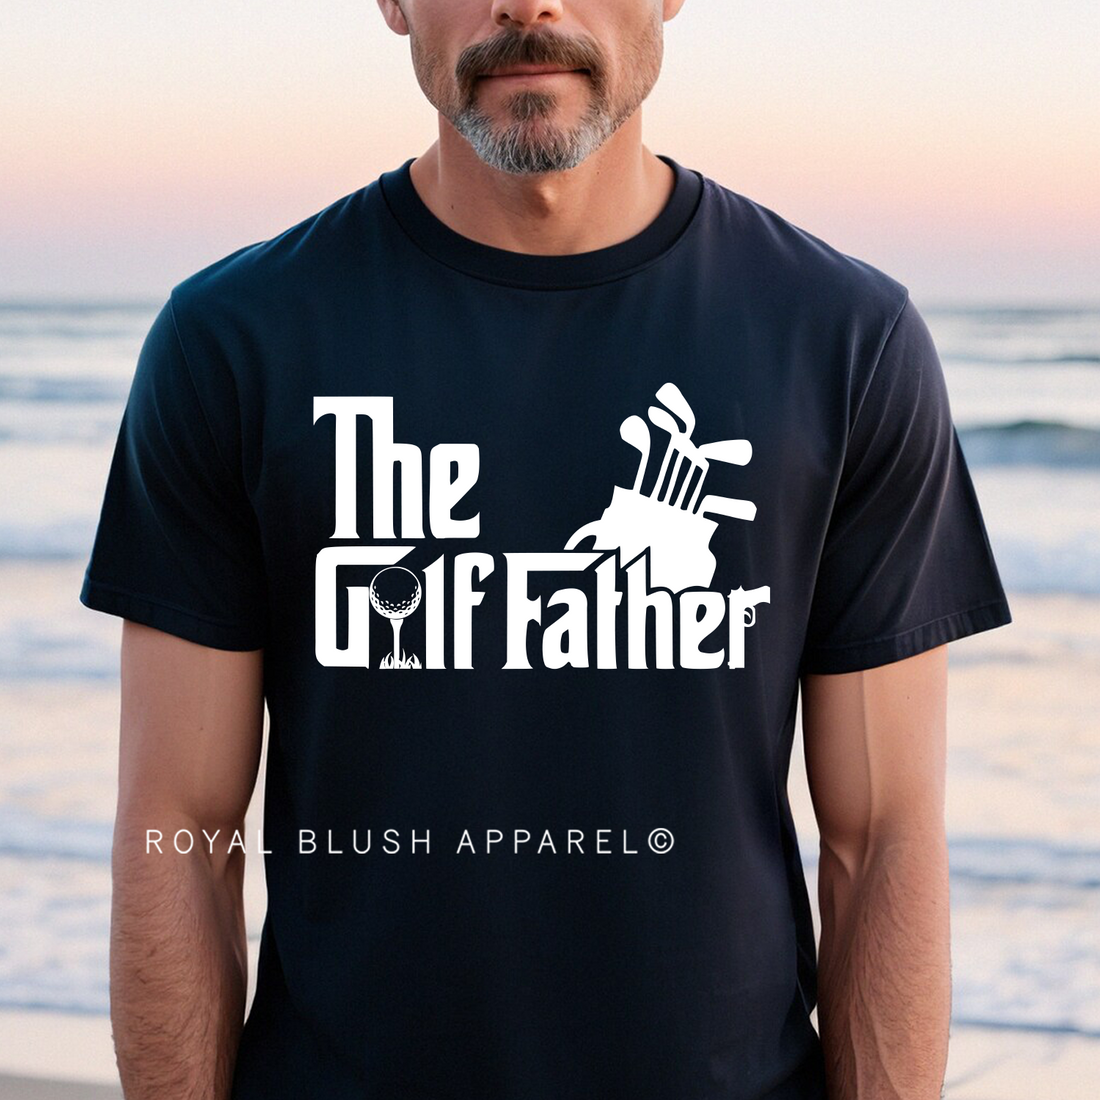 The Golf Father Full Color Transfer